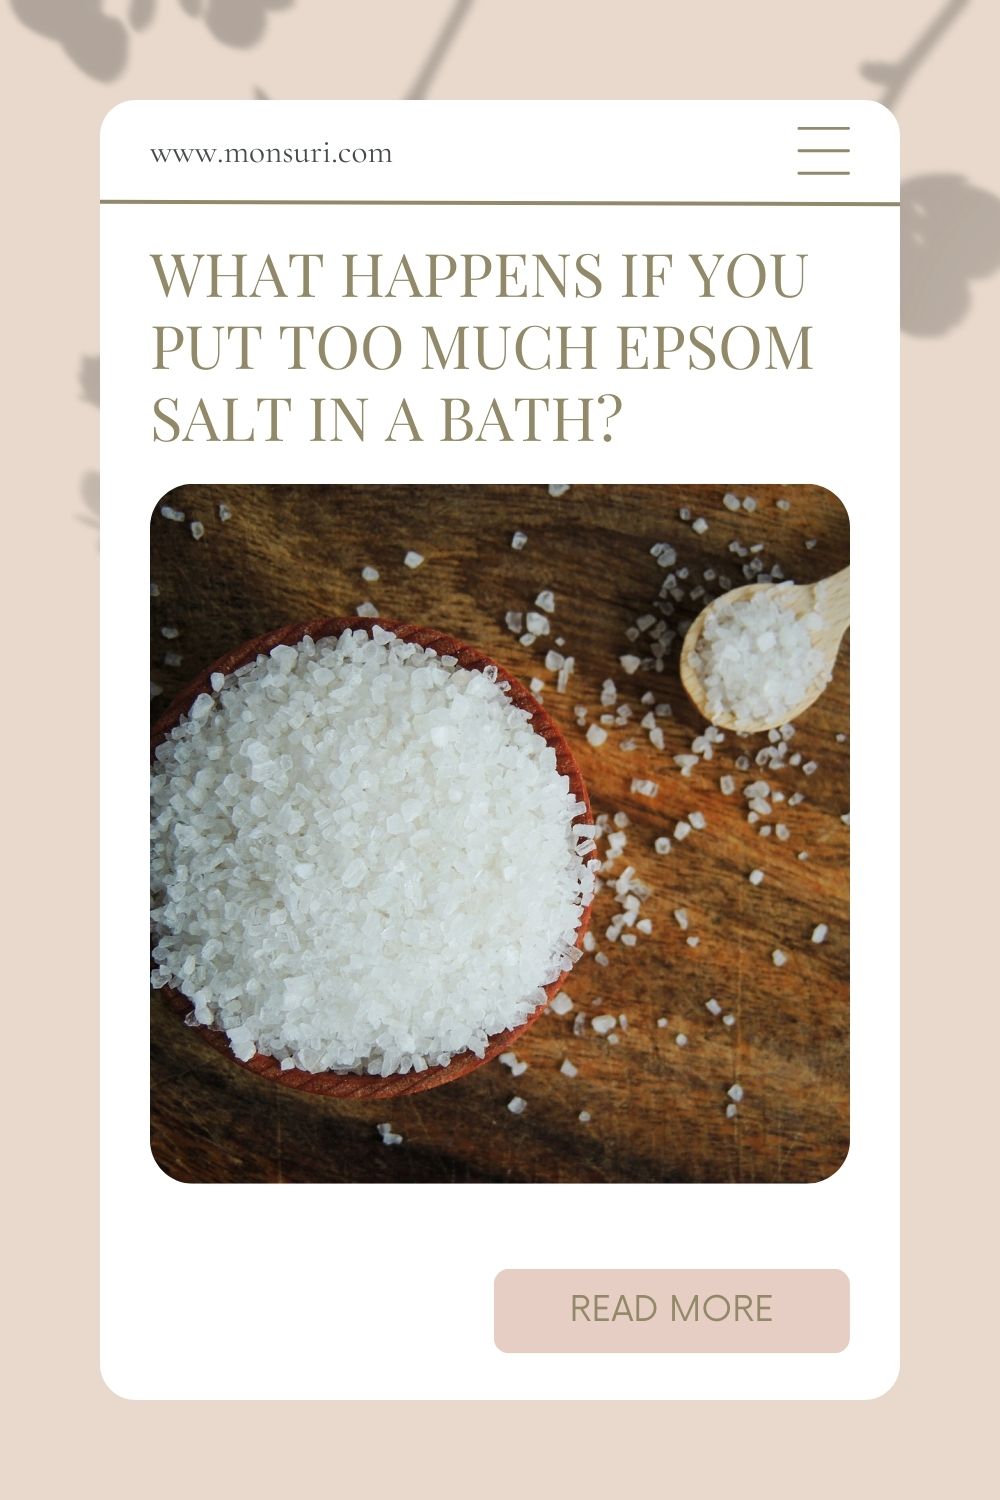 What Happens If You Put Too Much Epsom Salt In A Bath?